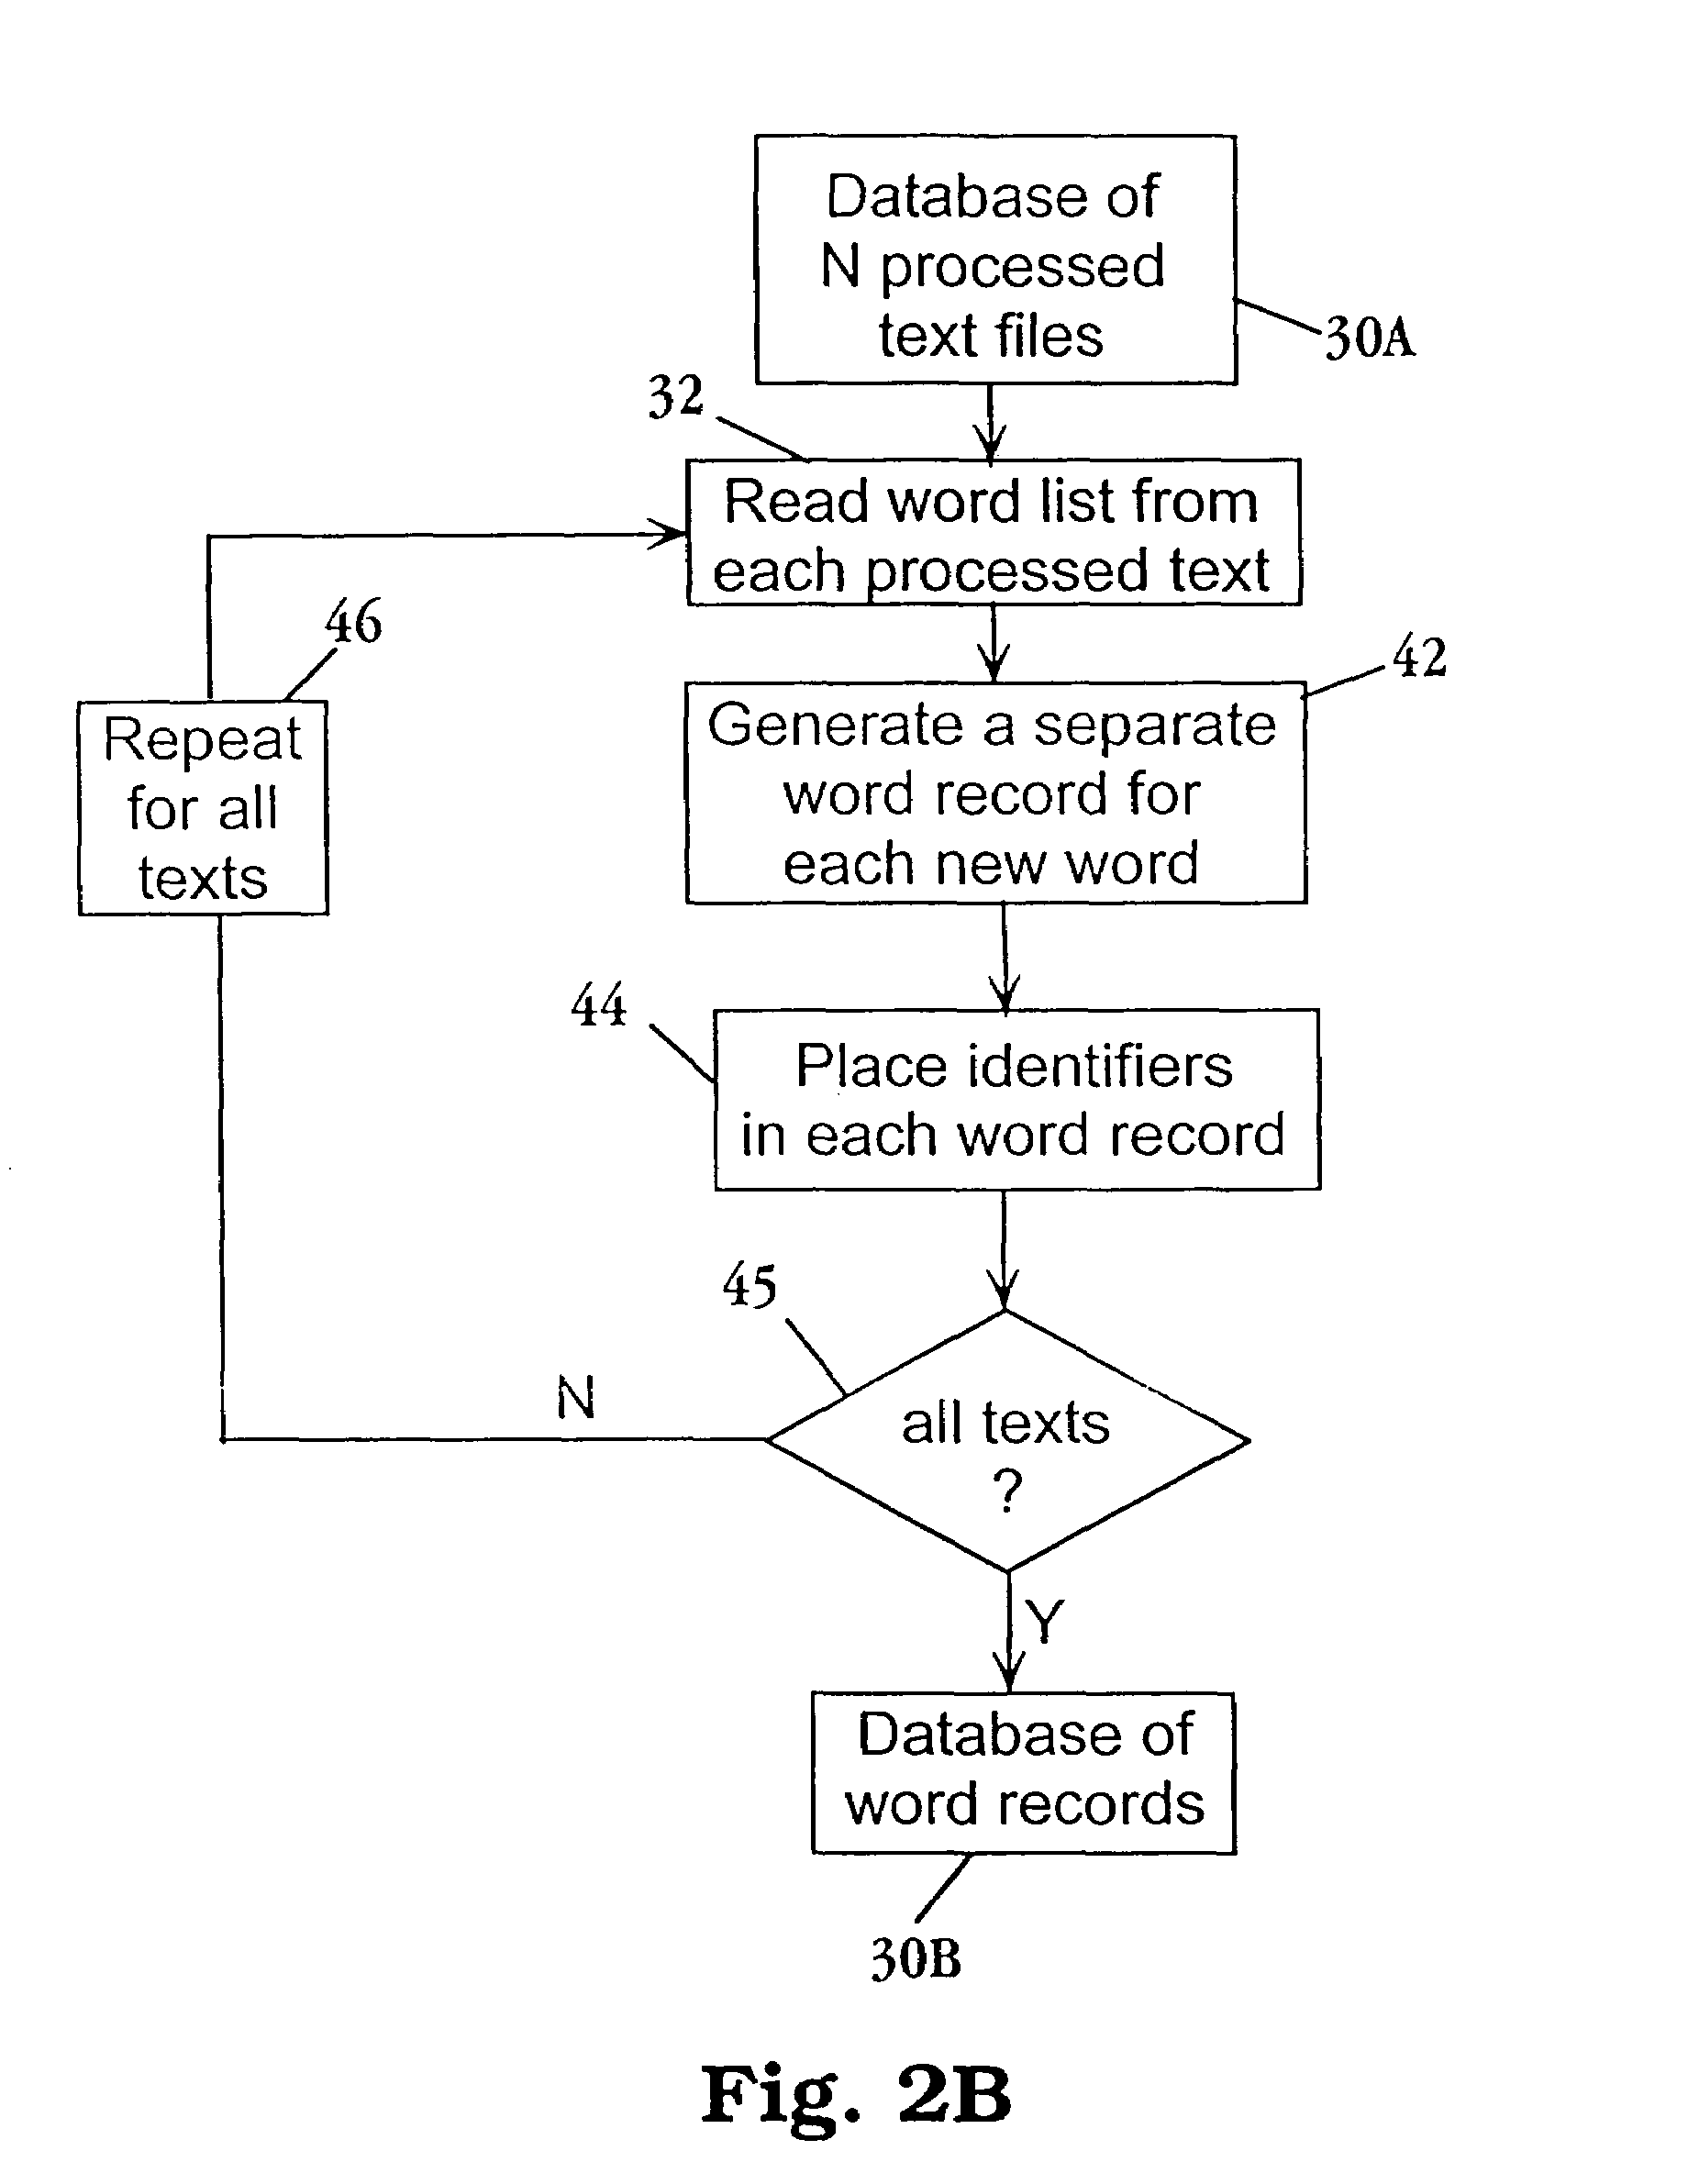 Code, system and method for representing a natural-language text in a form suitable for text manipulation